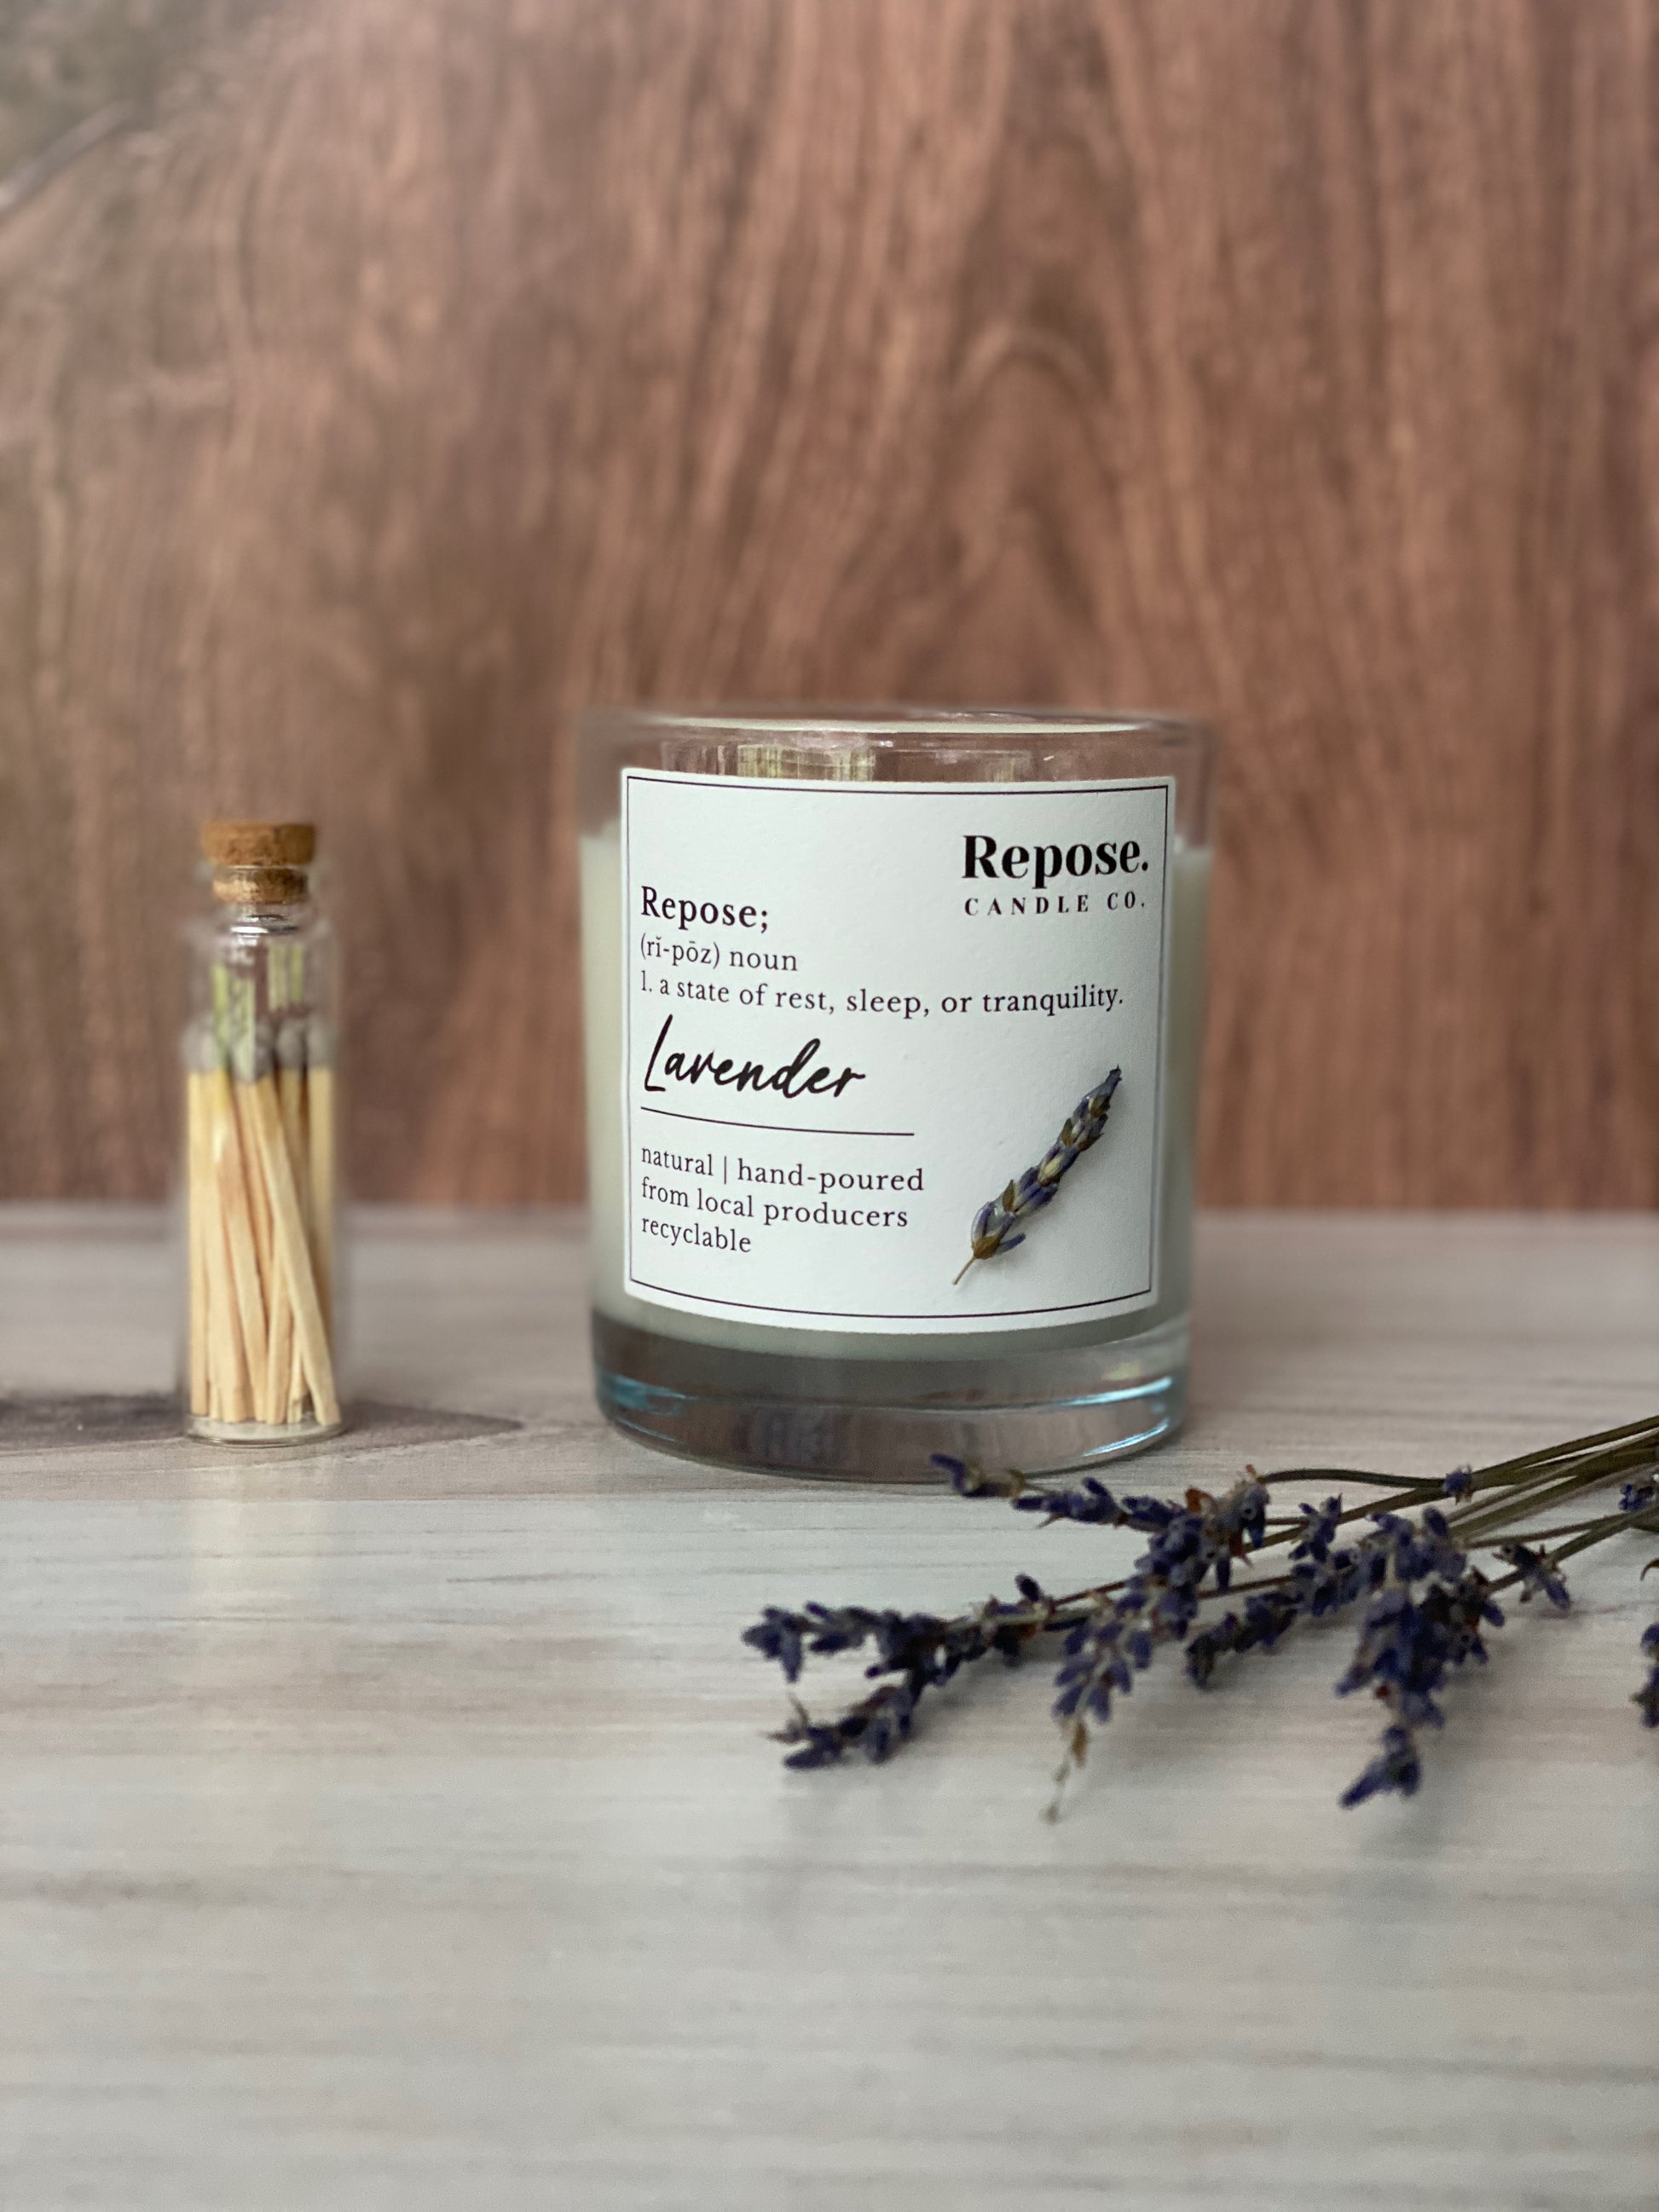 One 7.5 oz Lavender Candle.